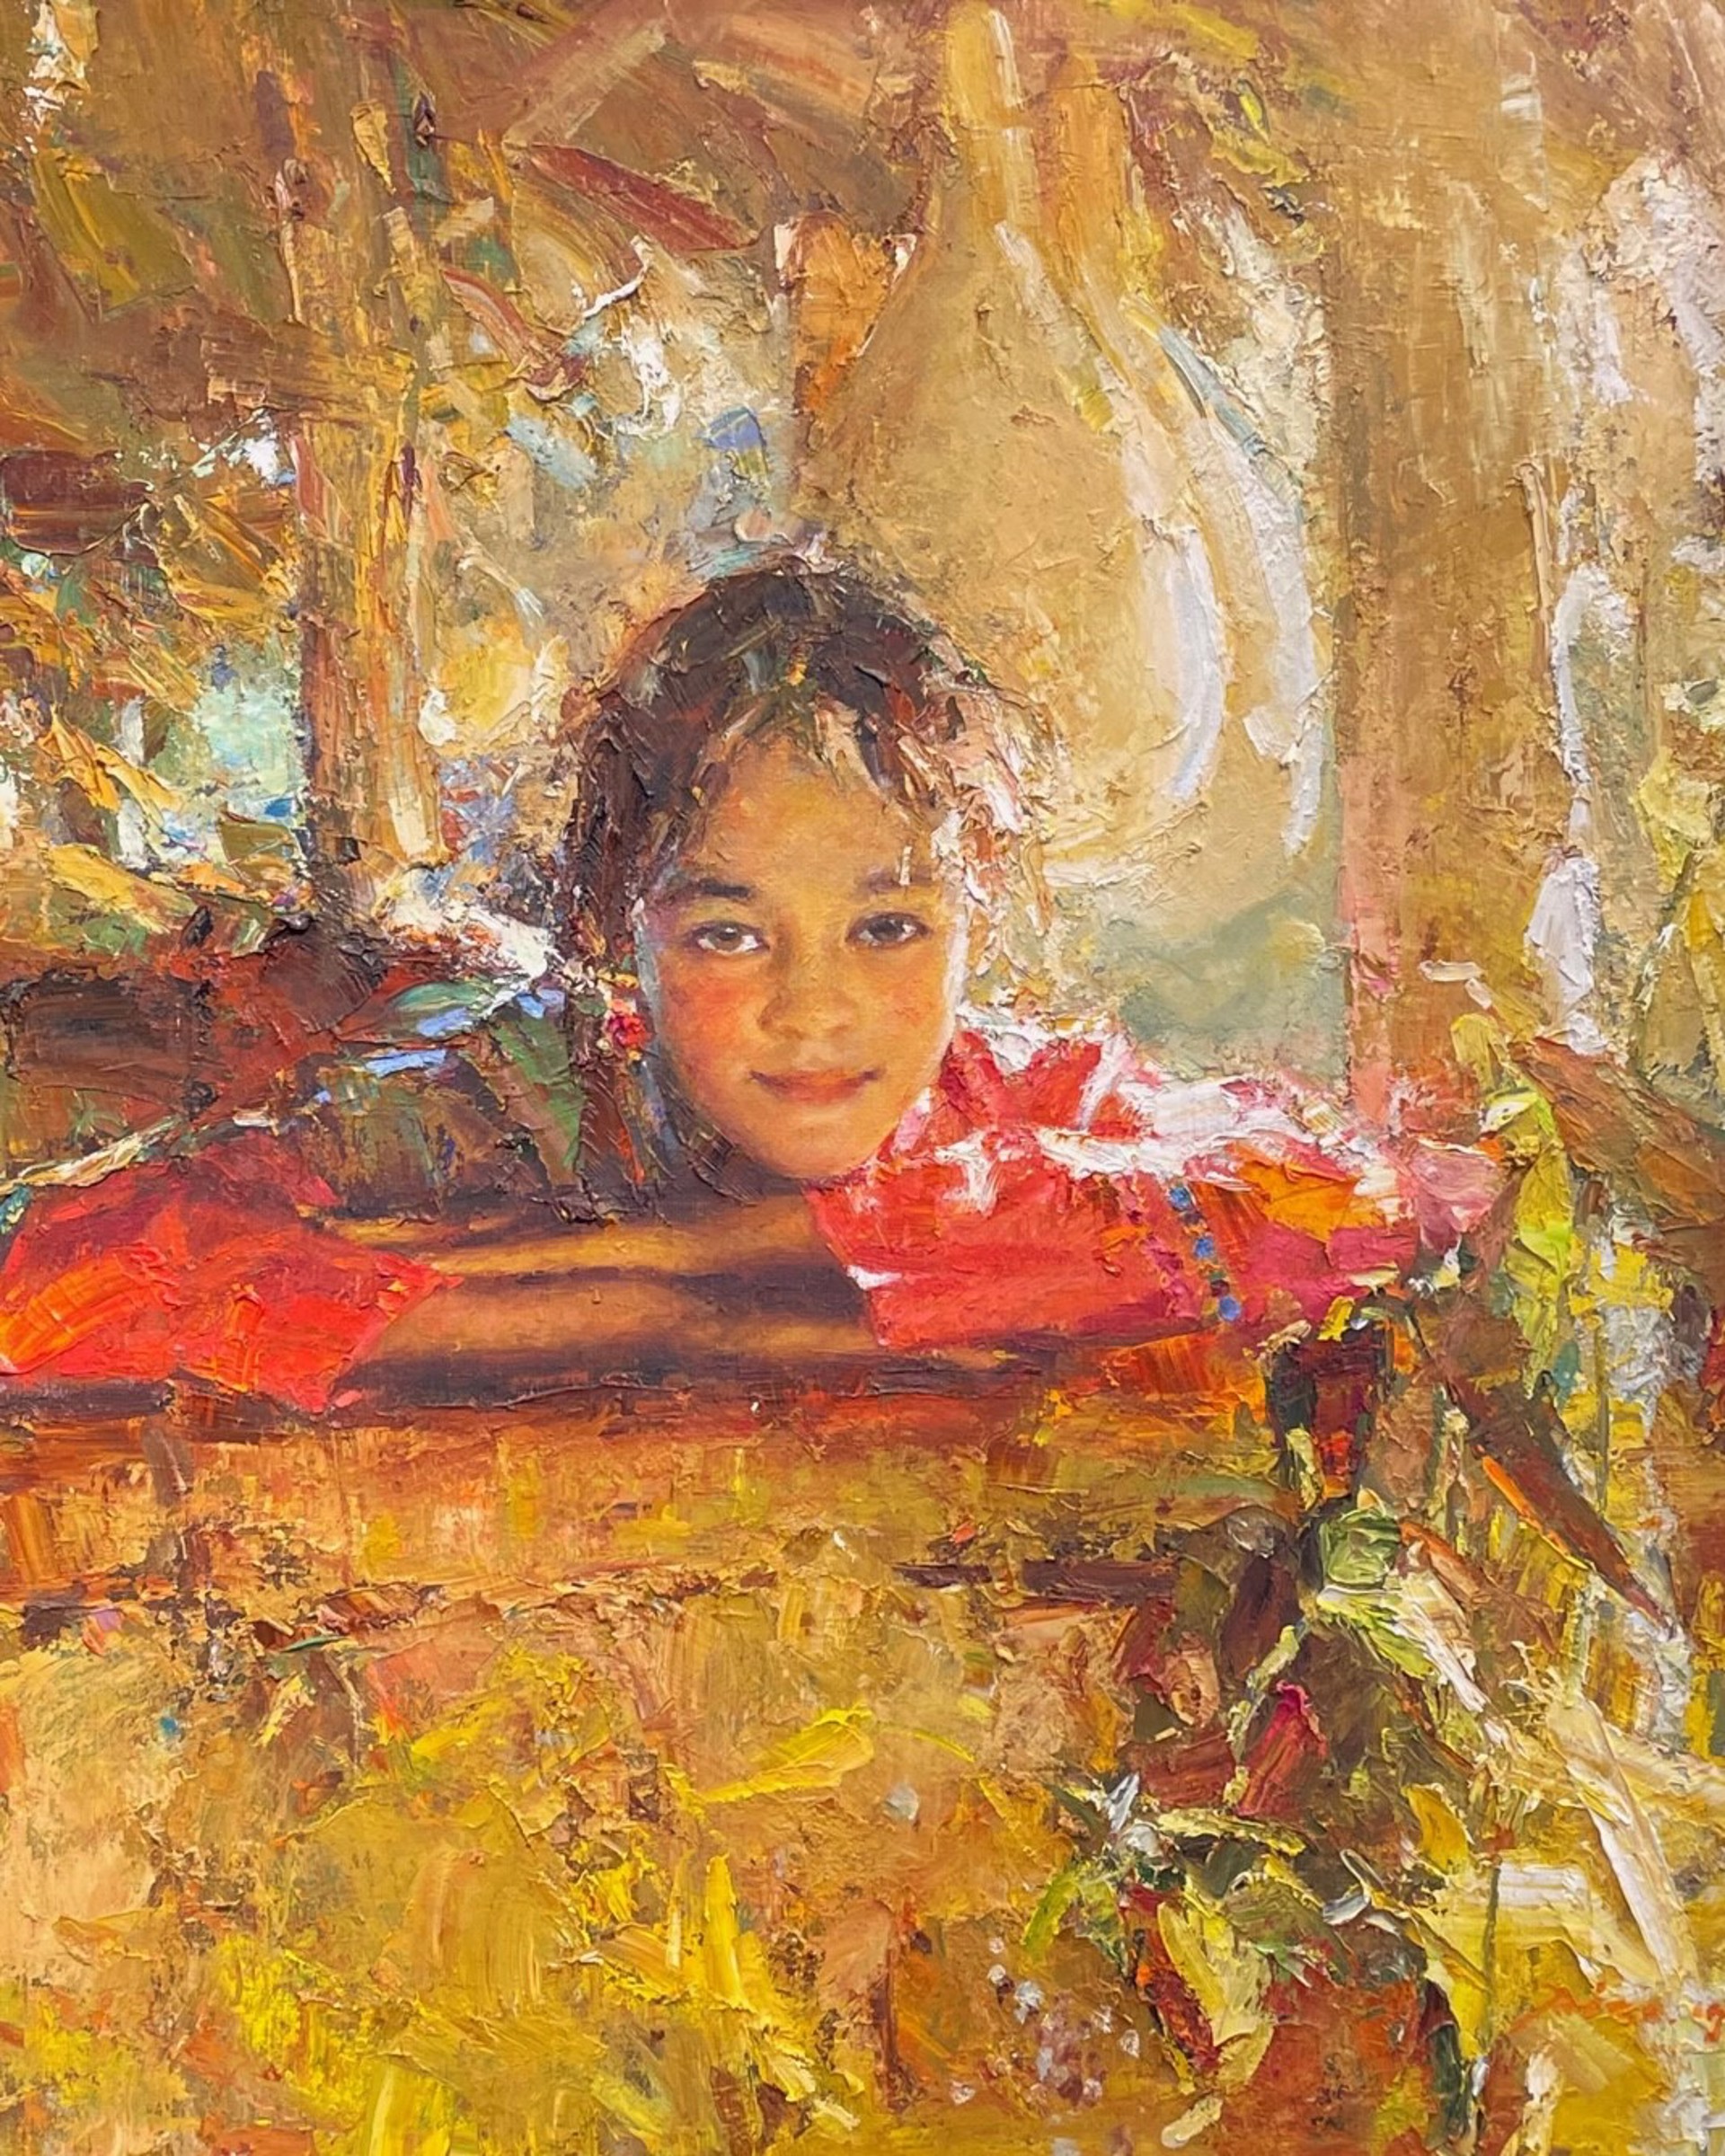 Beauty In Red by Piao Xue Cheng